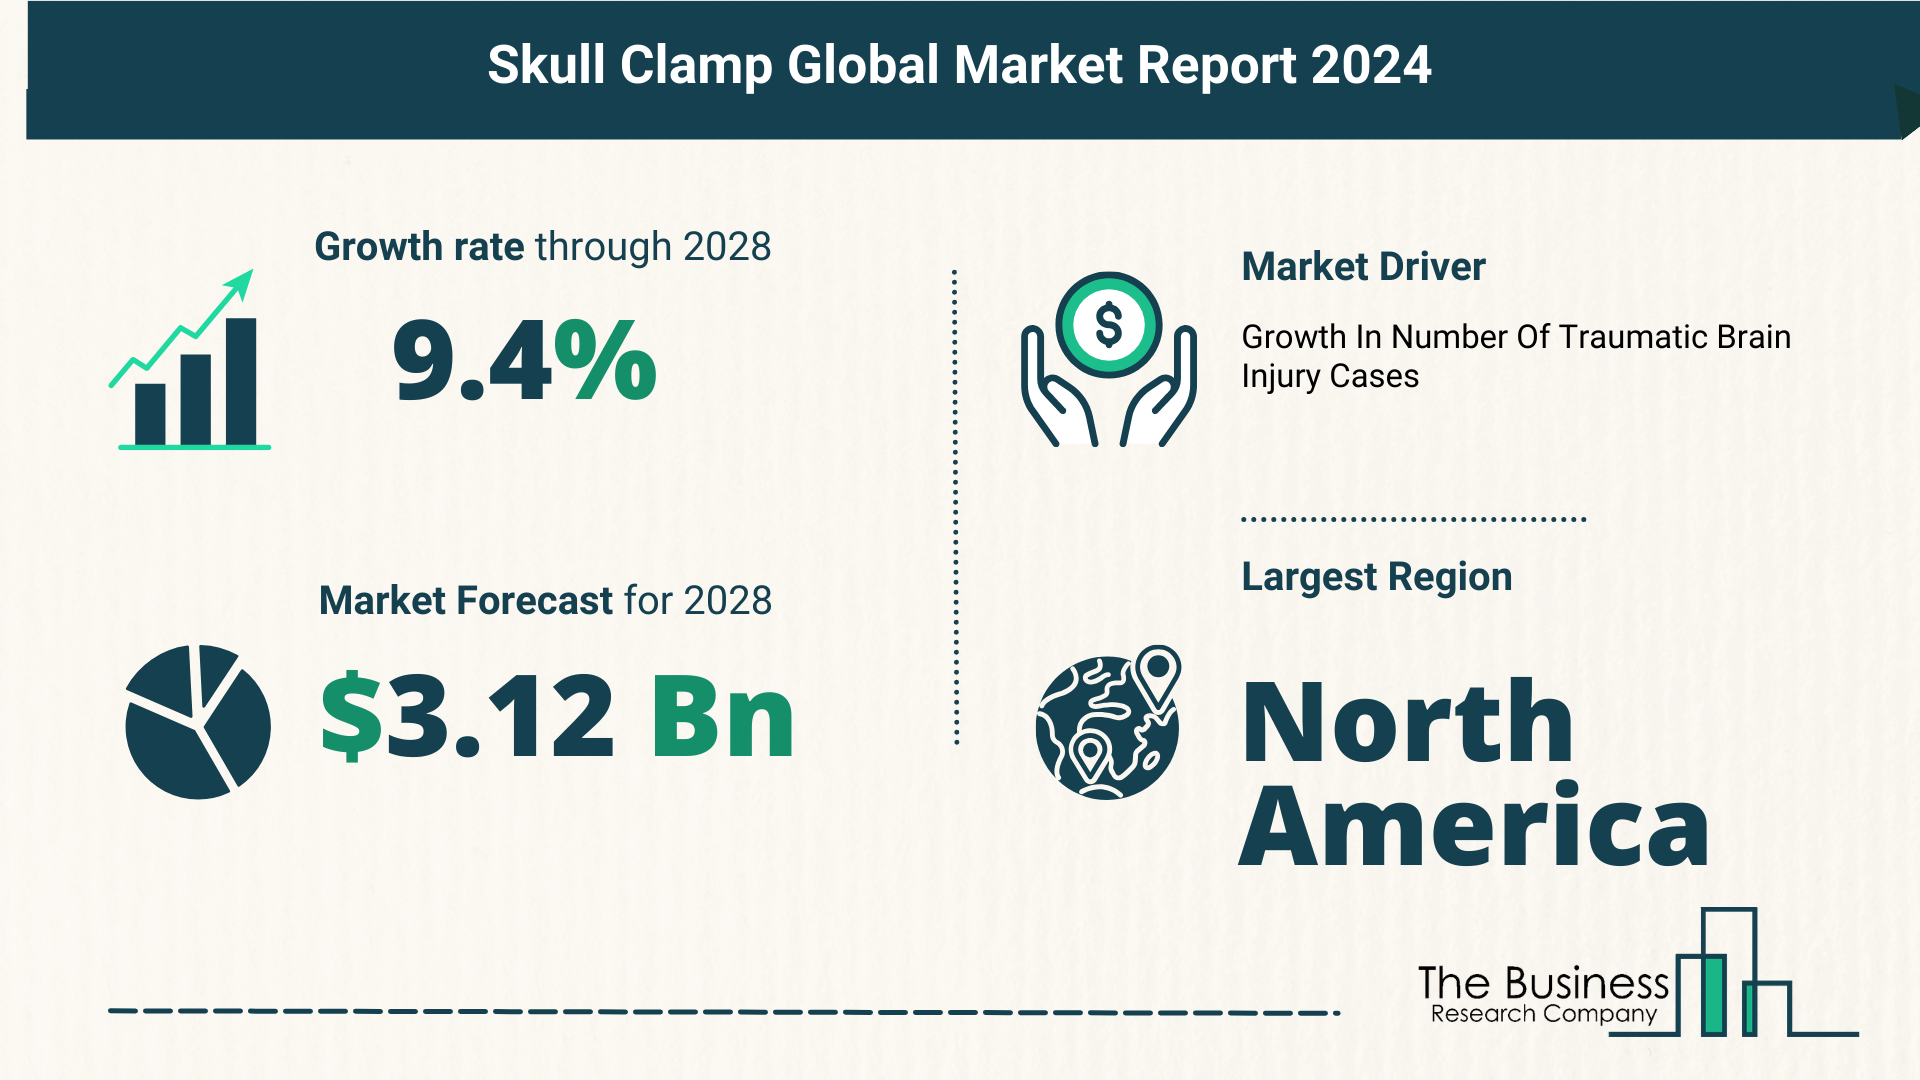 Top 5 Insights From The Skull Clamp Market Report 2024